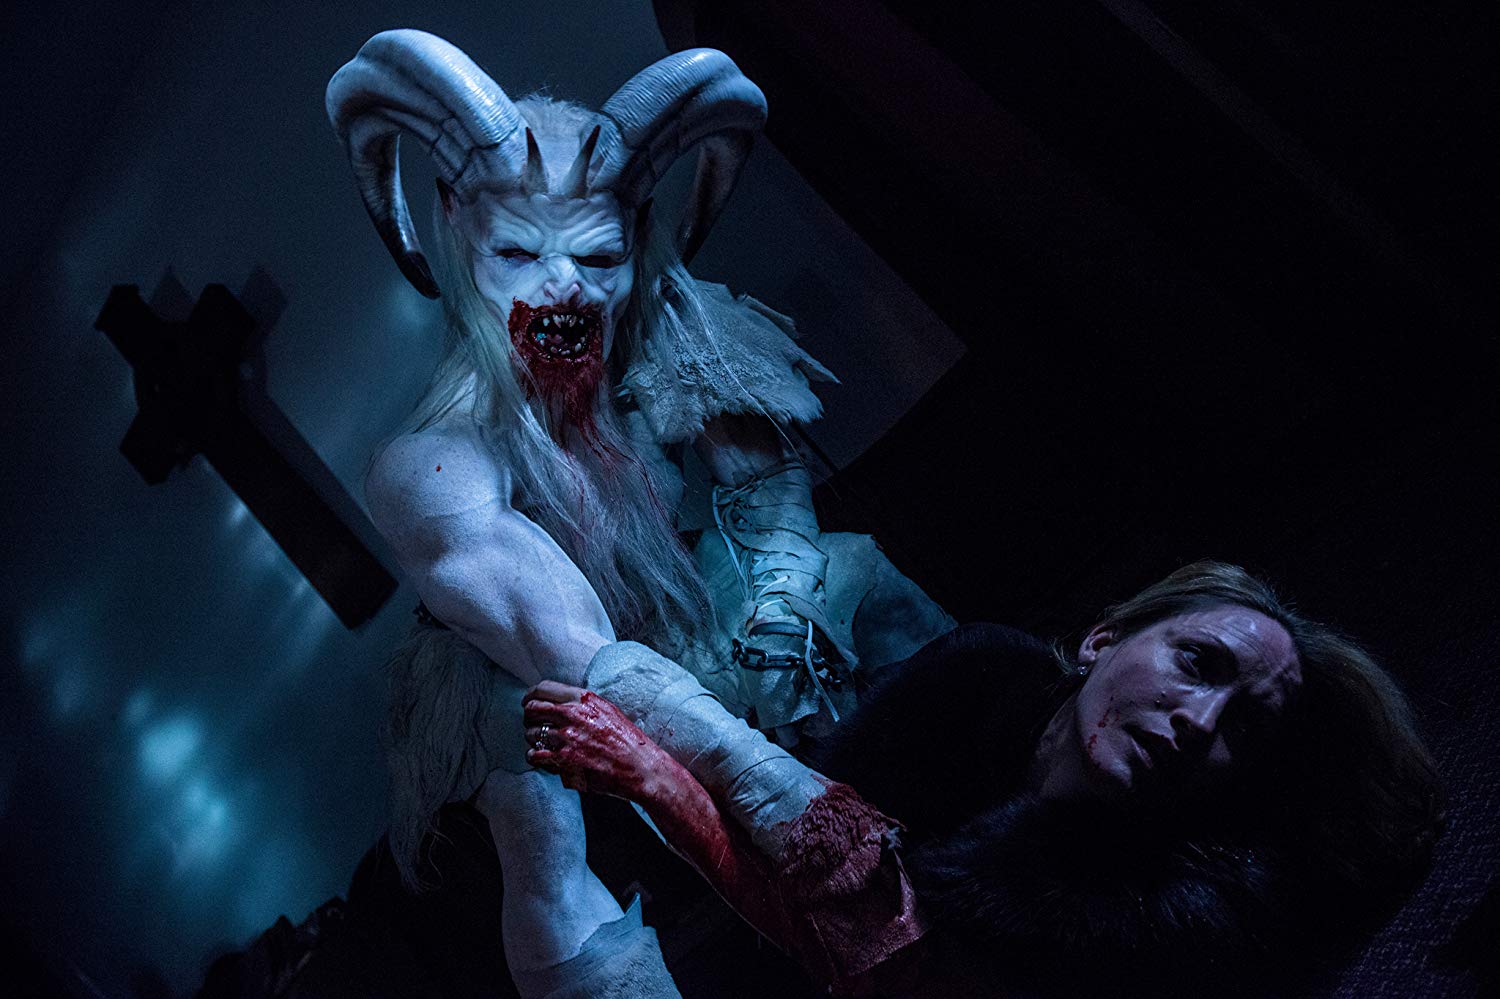 A Christmas Horror Story 2015 Watch Online on 123Movies!1500 x 999